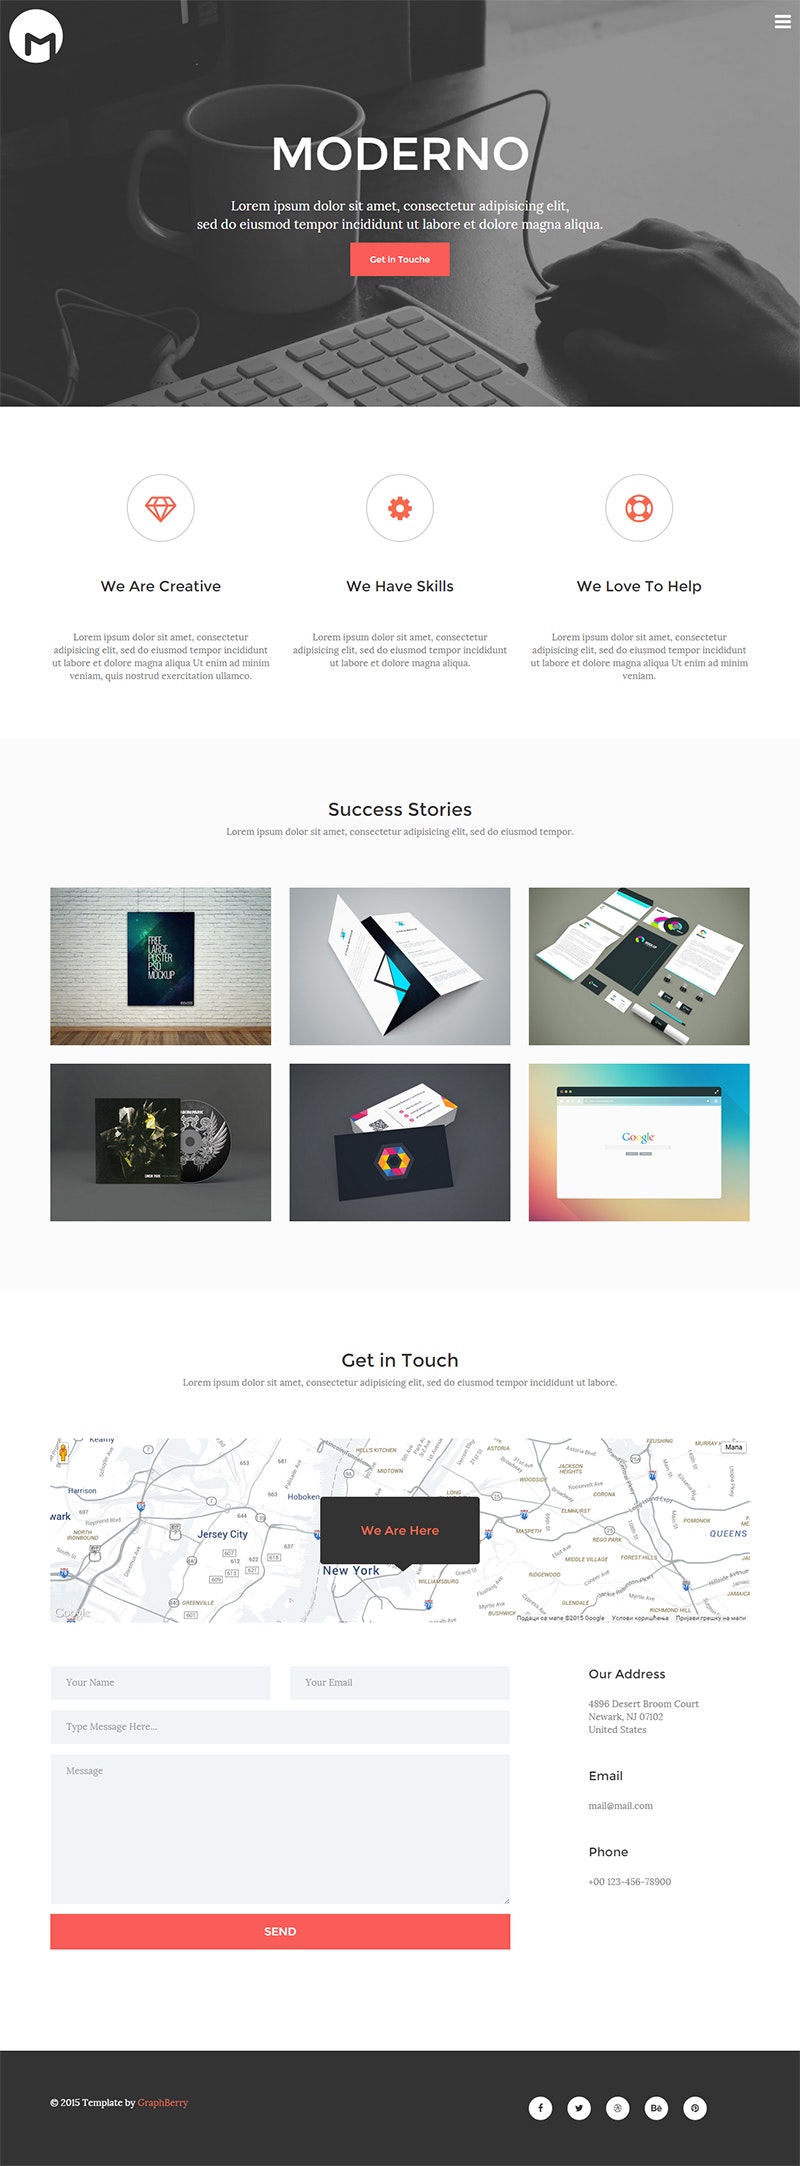 Moderno - Free HTML5 Responsive Template preview